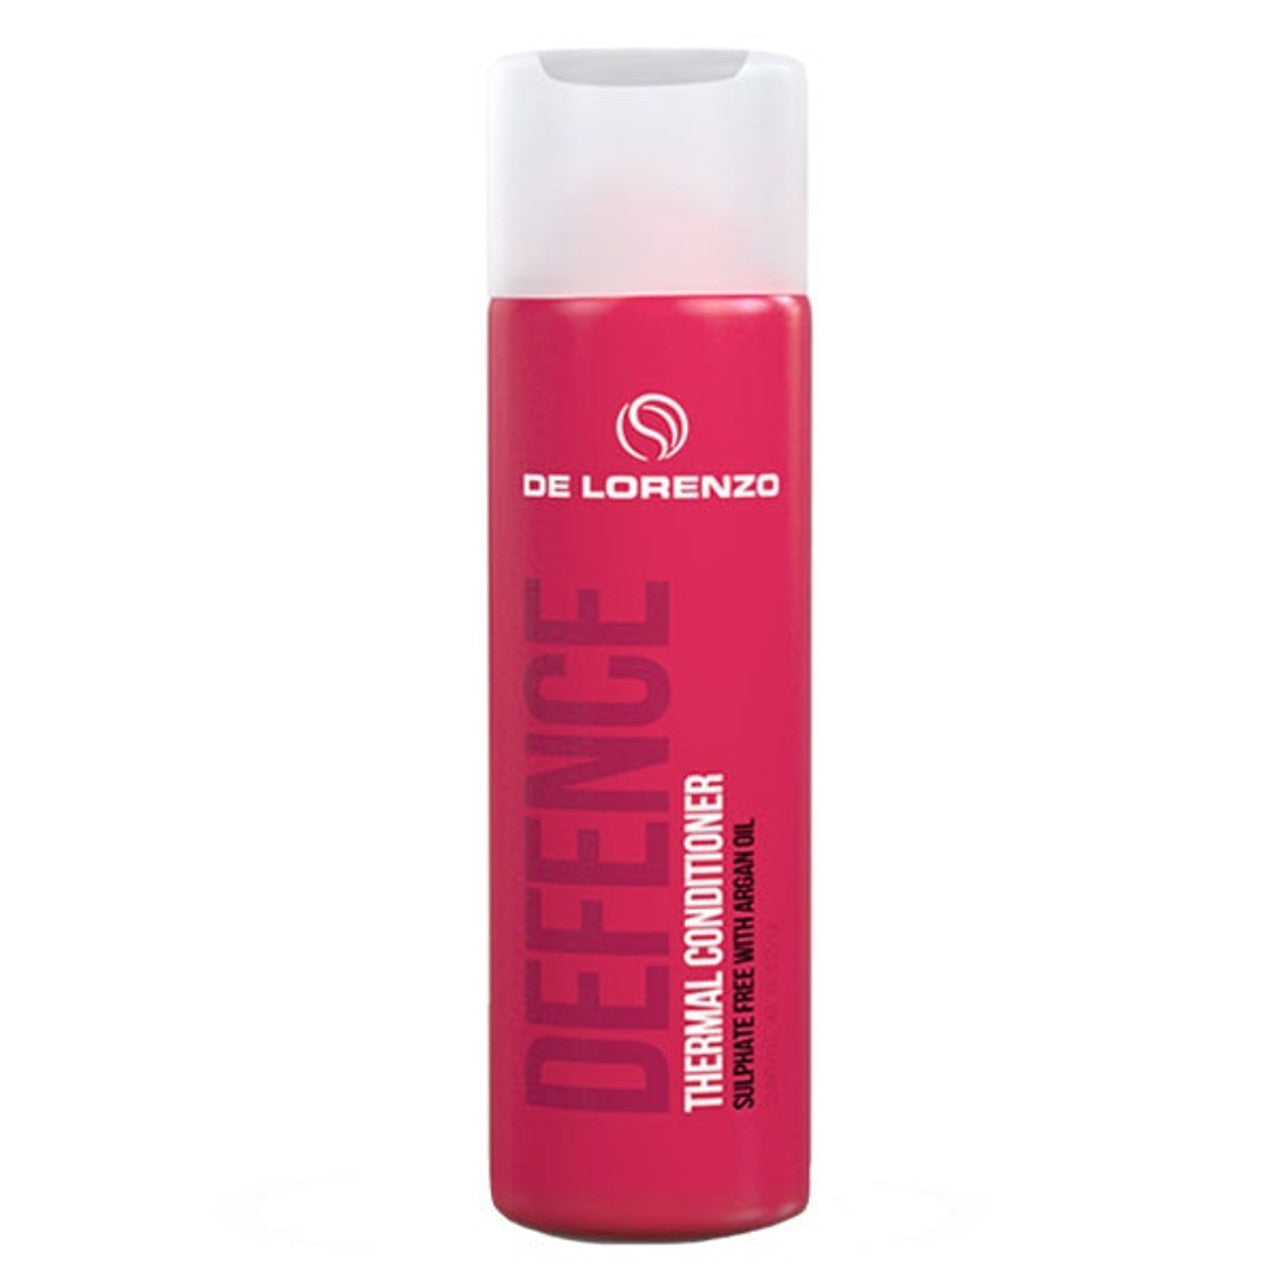 DE LORENZO DEFENCE - Thermal Conditioner 240ml - Kess Hair and Beauty